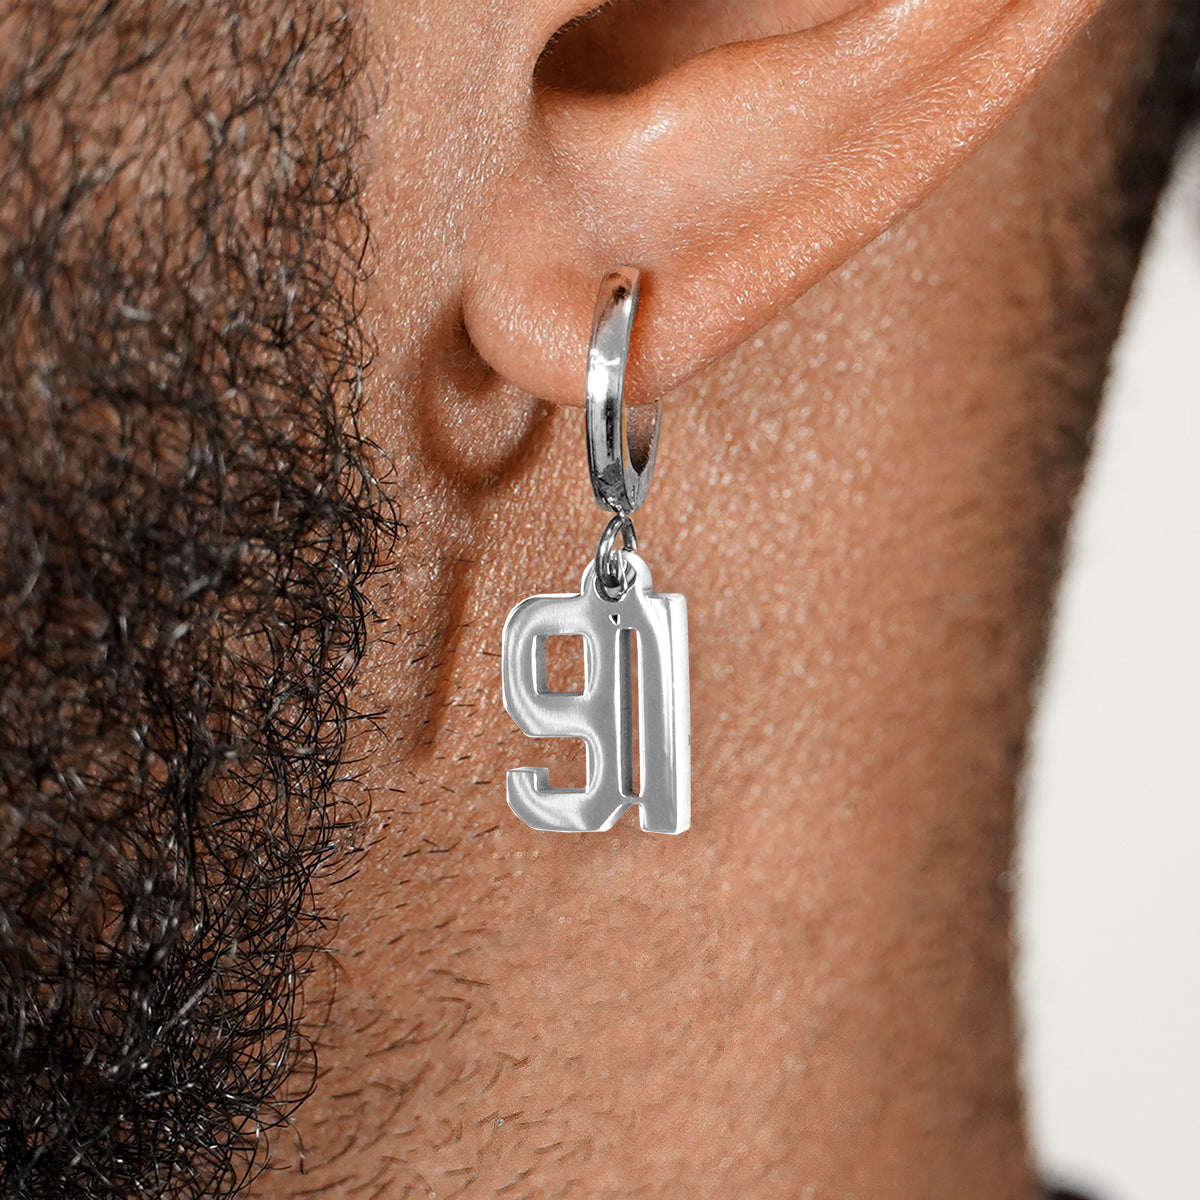 91 Number Earring - Stainless Steel